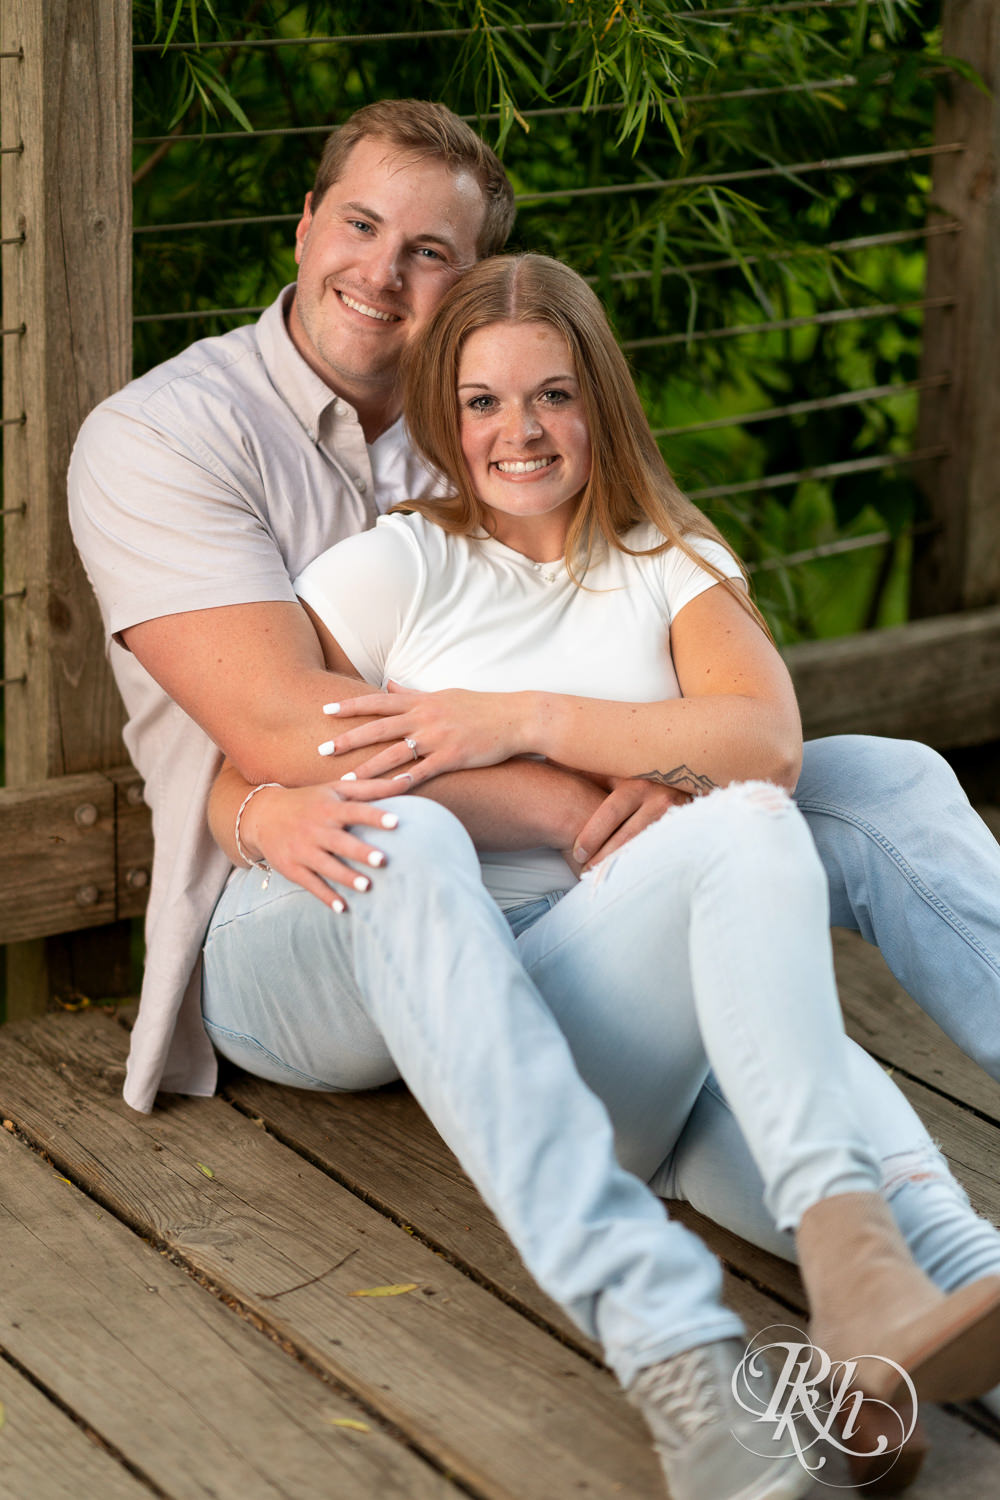 Man and woman in jeans smile on bridge during golden hour engagement photography in Eagan, Minnesota.